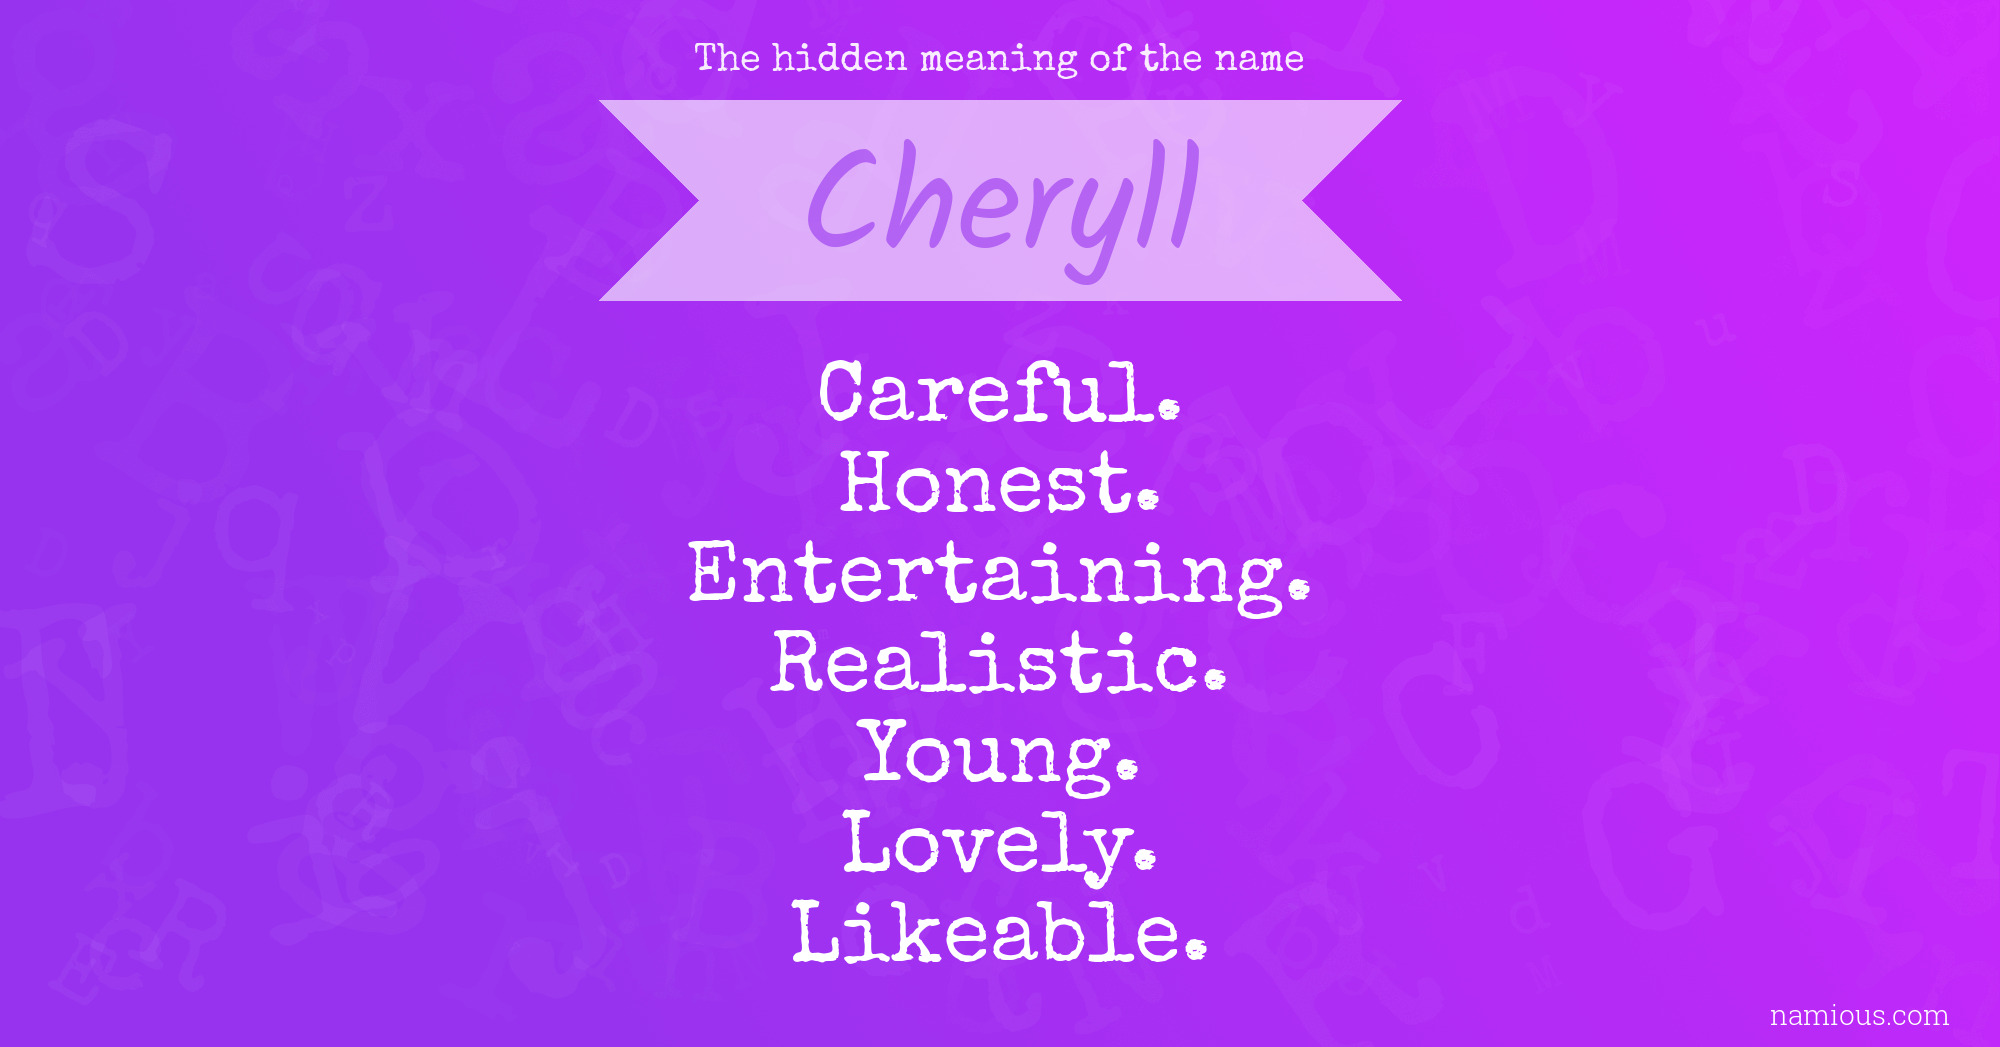 The hidden meaning of the name Cheryll